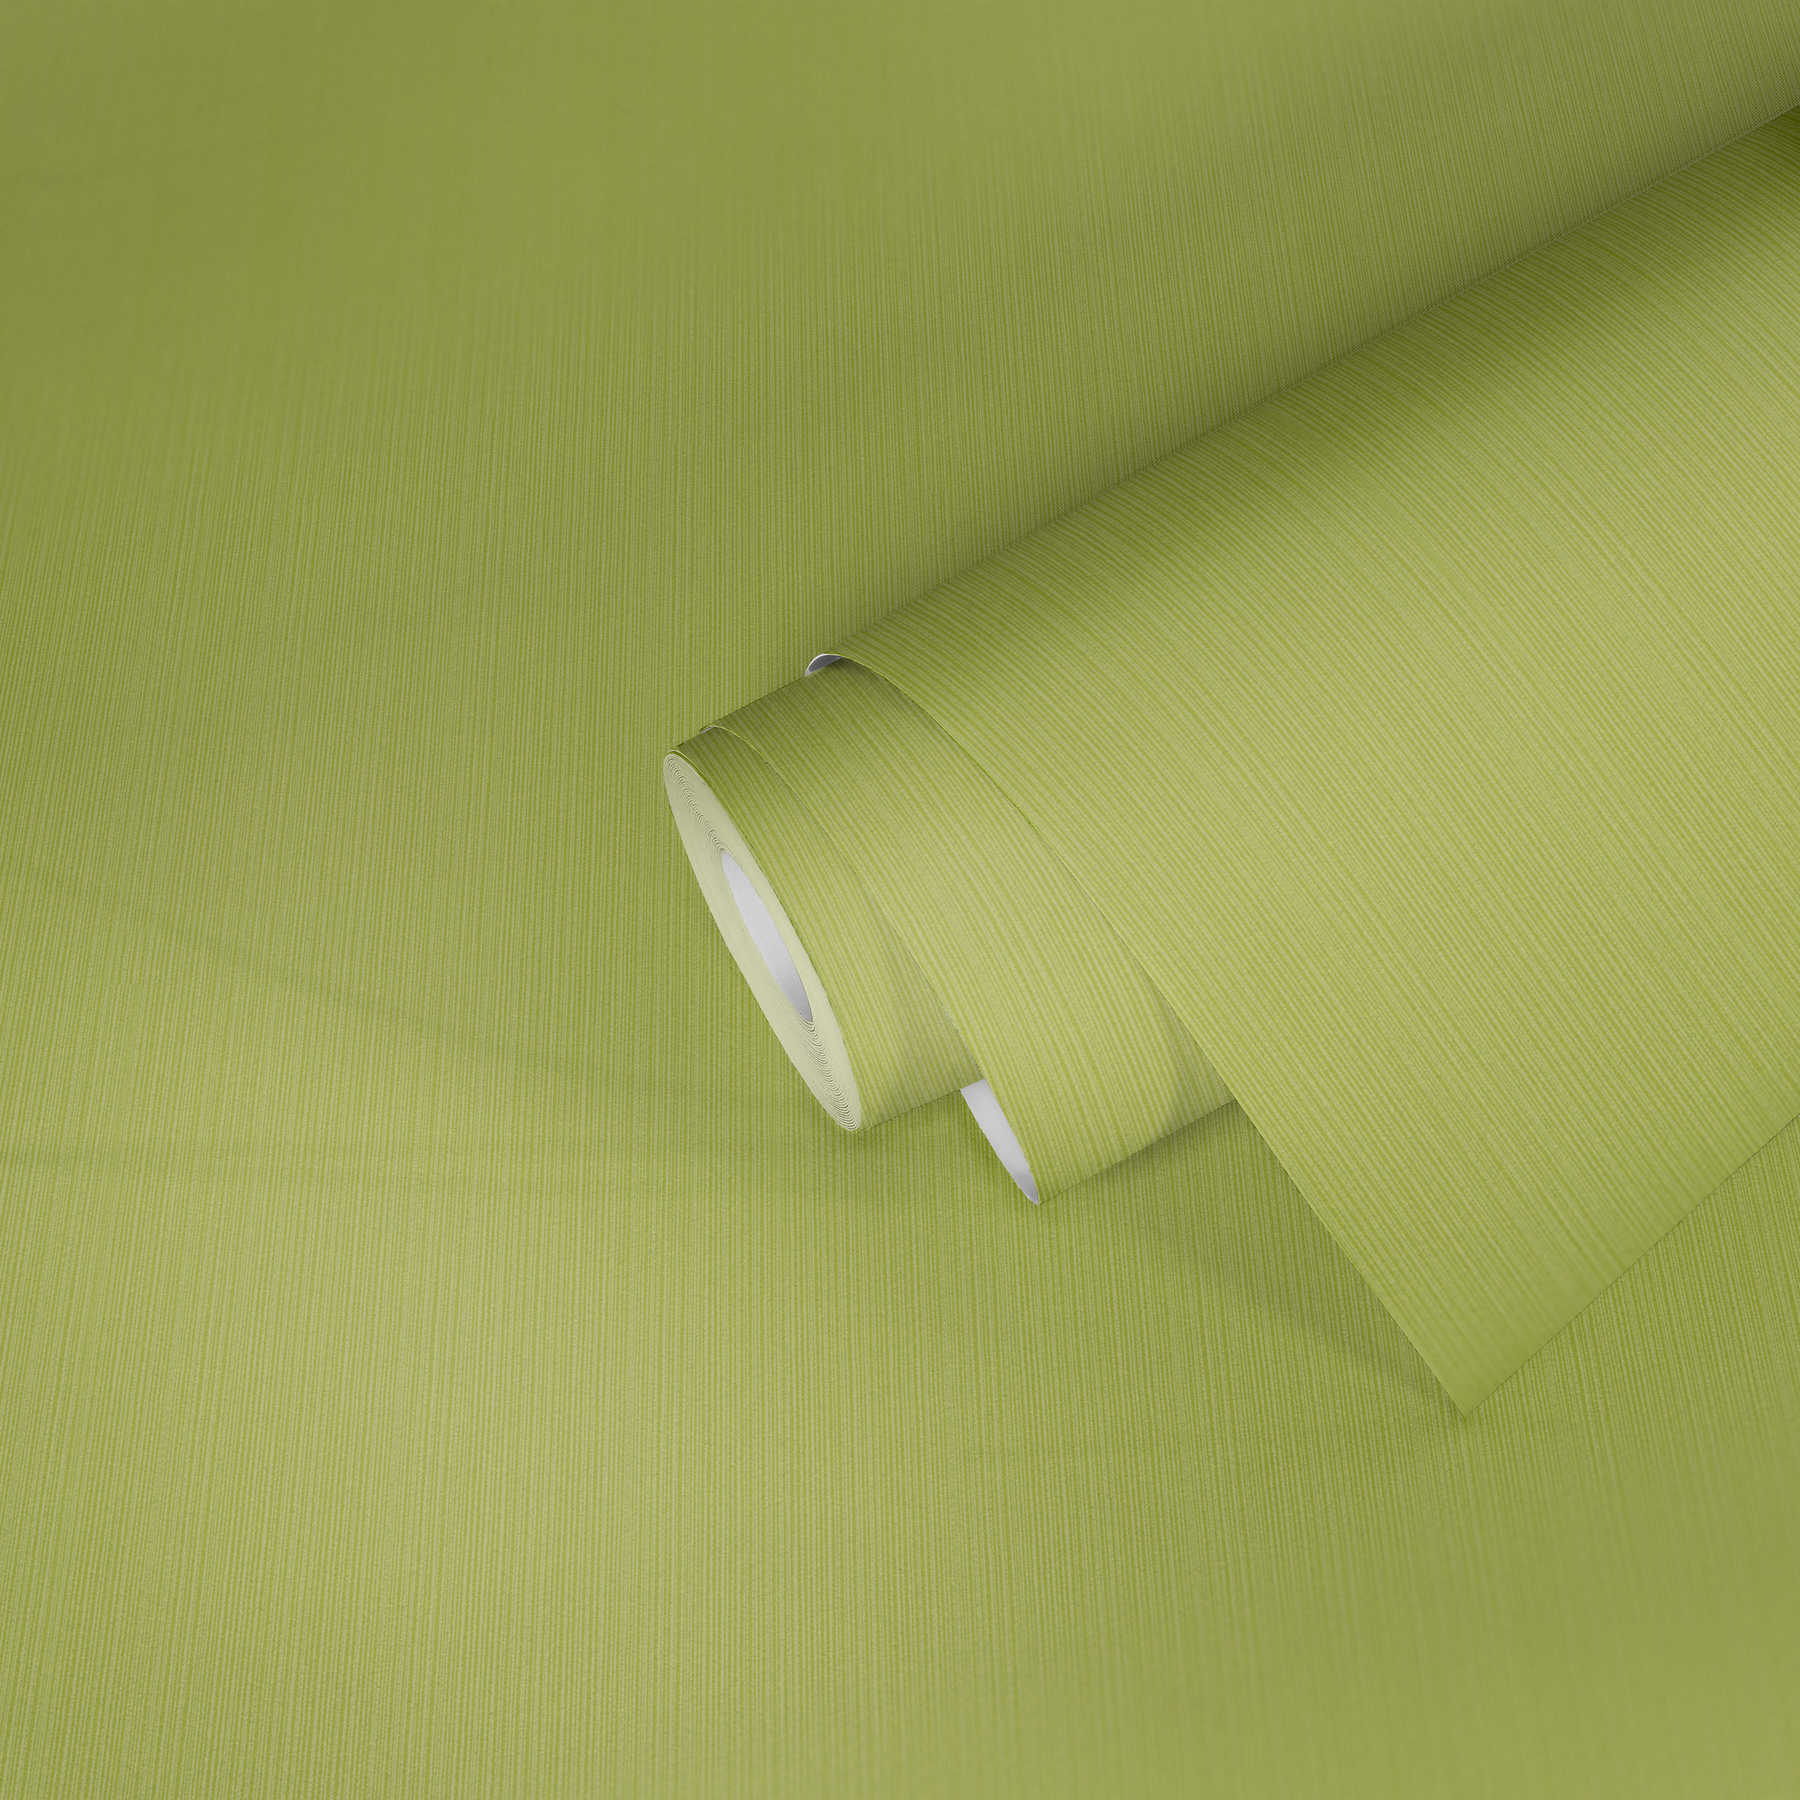             wallpaper lime green plain, with striped texture effect
        